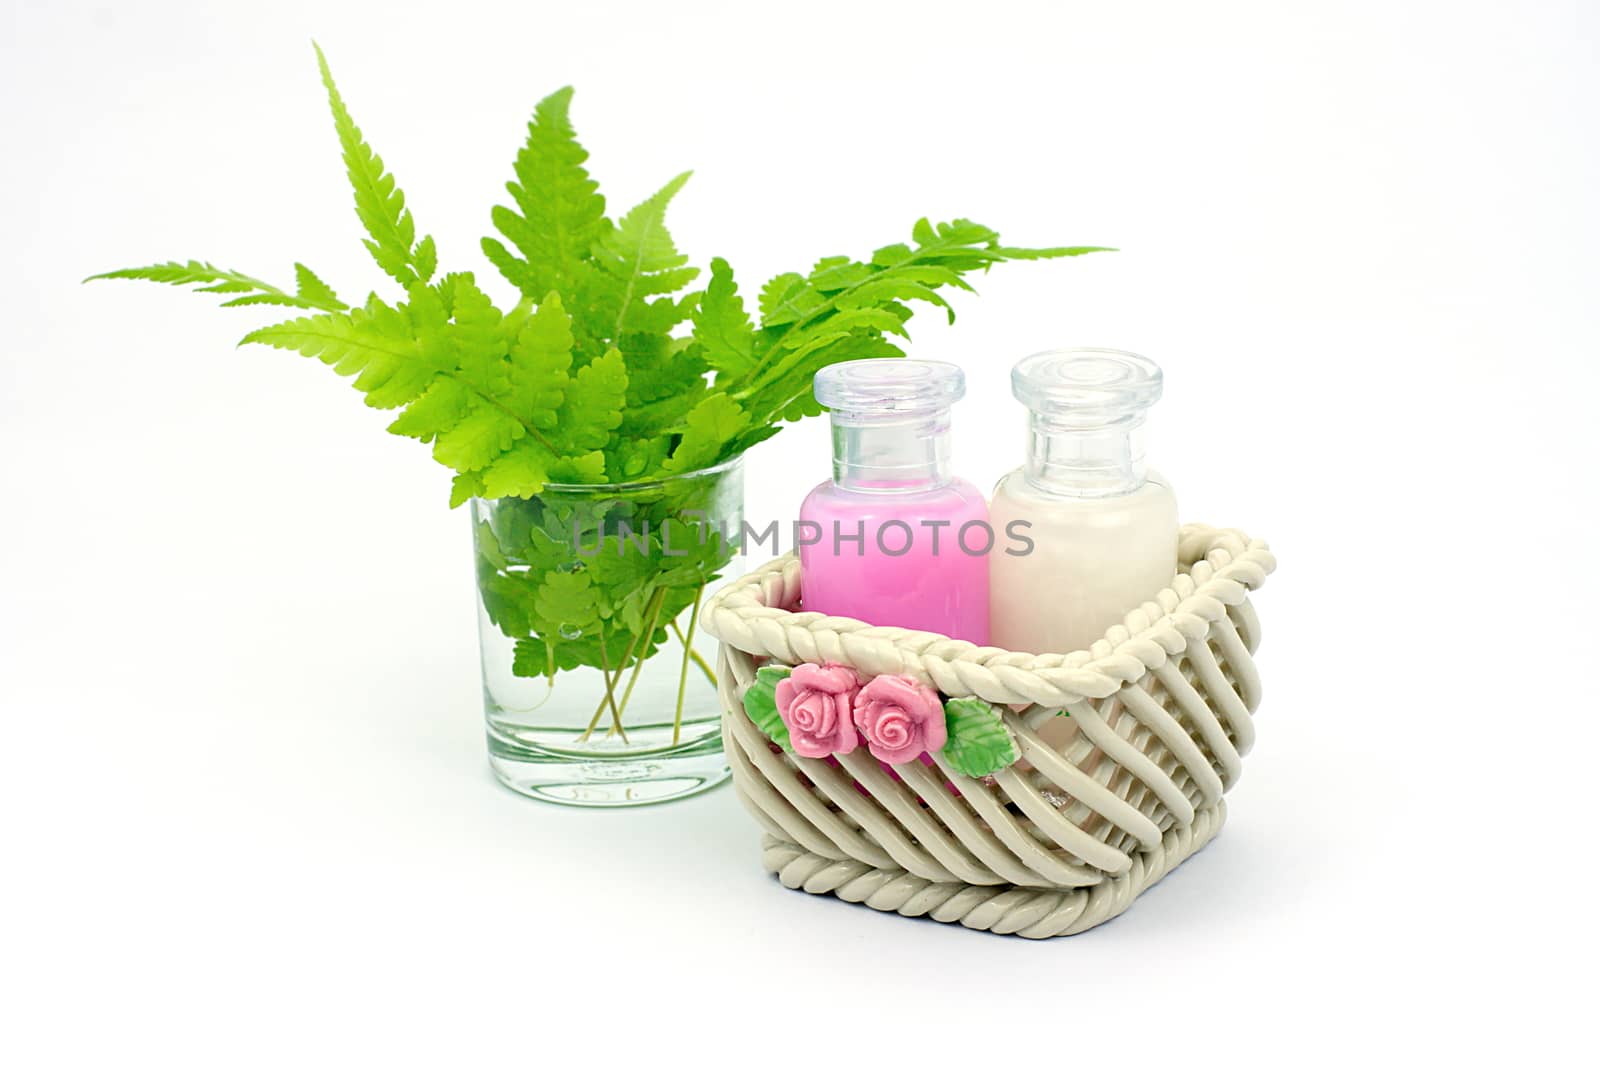 Shampoo and Shower gel put in ceramic basket on white background. Shampoo, Shower gel bottles with green leaves in a glass of water.